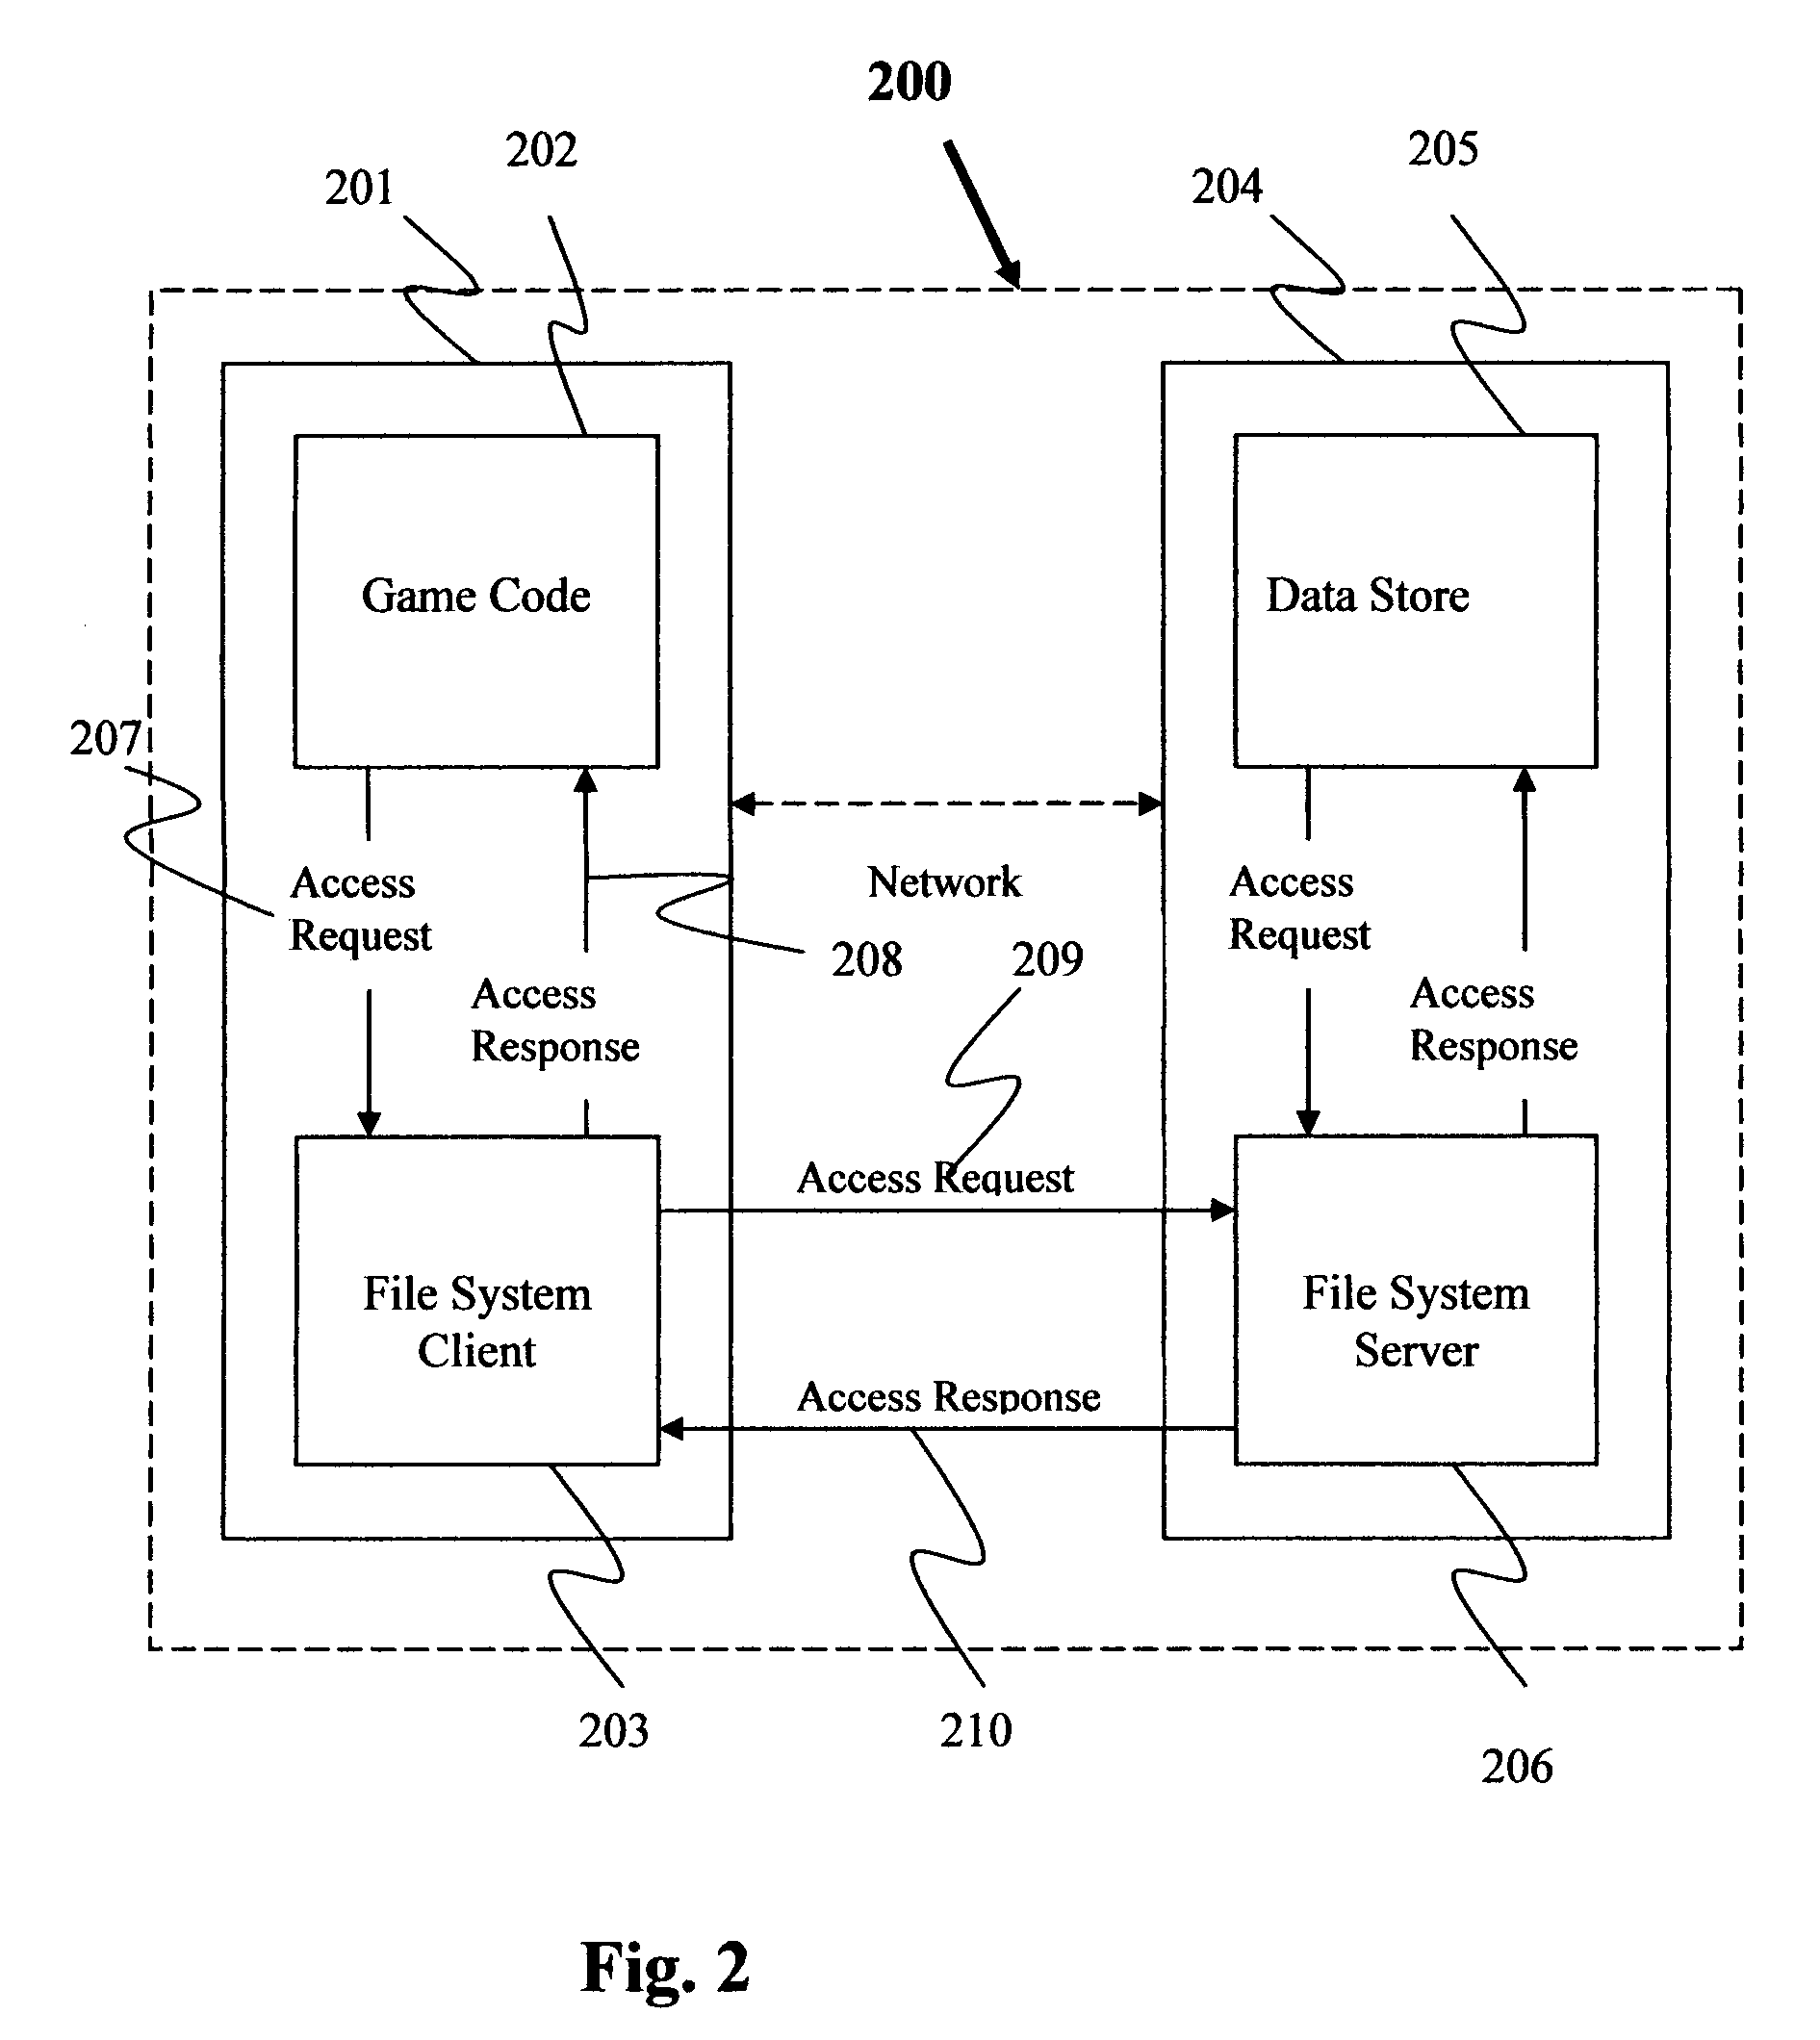 Self-authenticating file system in an embedded gaming device